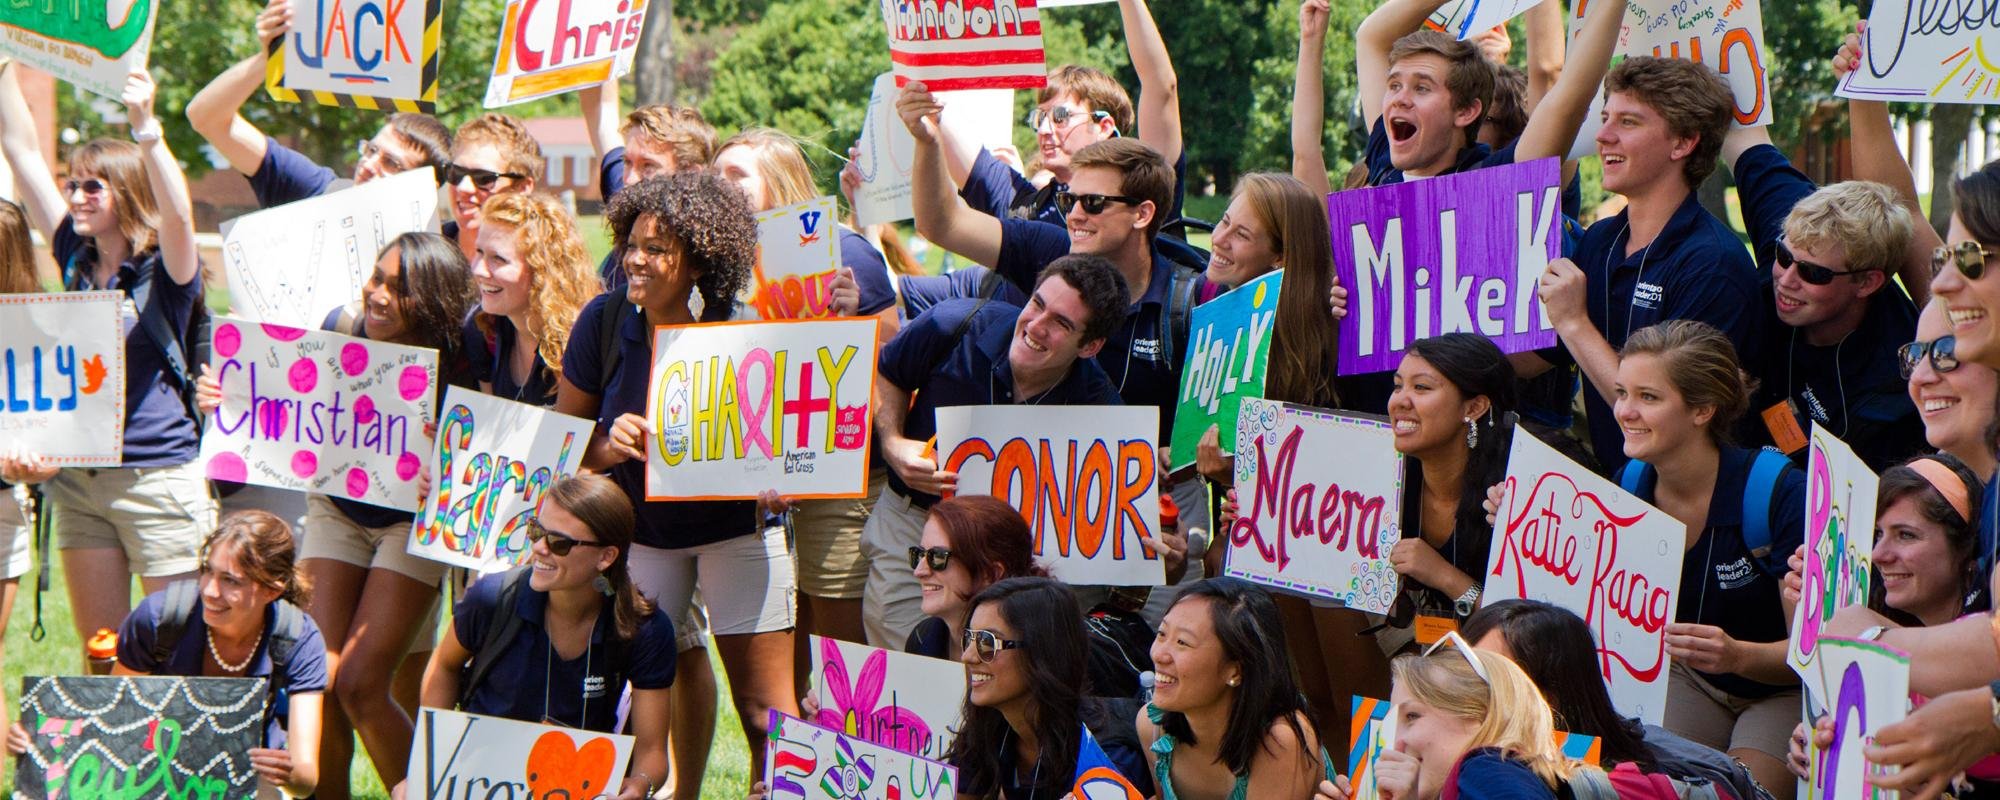 Group of Orientation Leaders holding signs on the Lawn